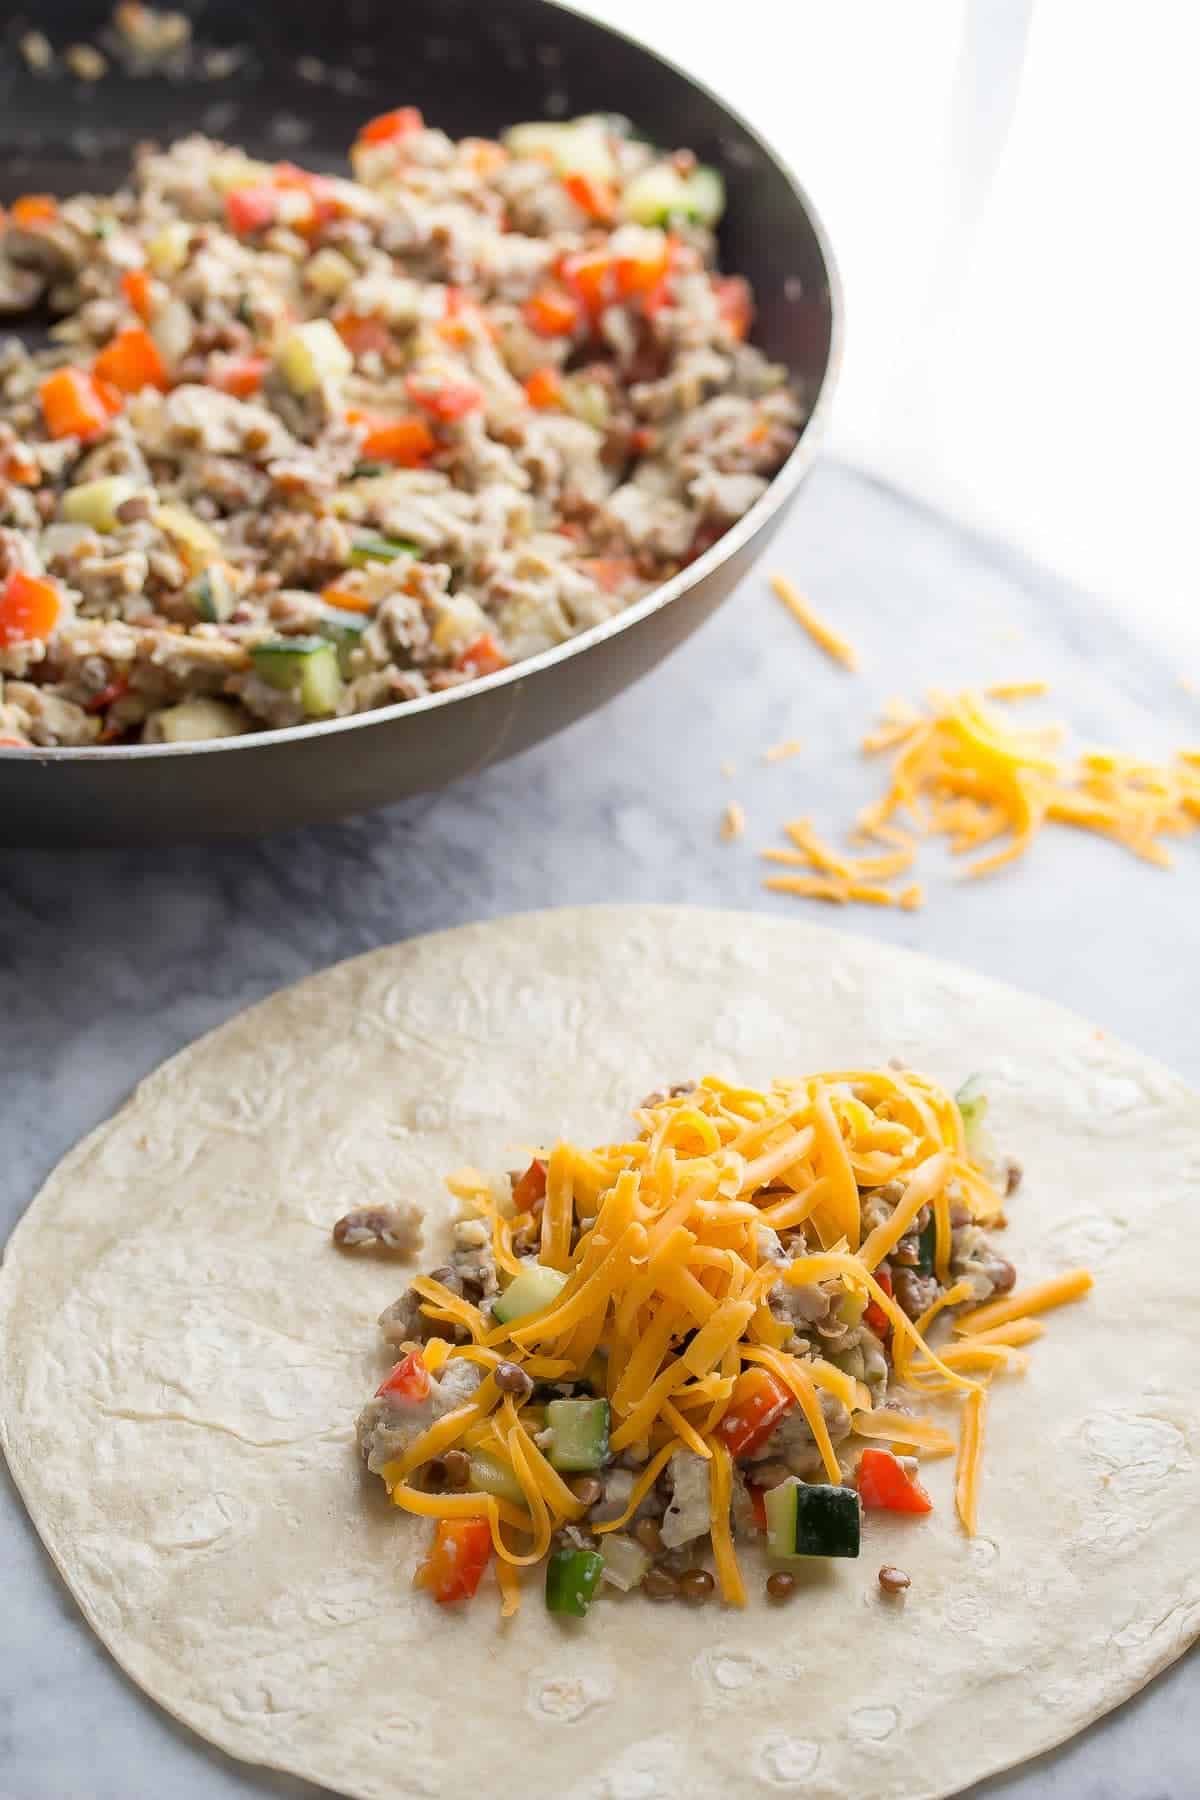 Healthy Breakfast Burritos with Zucchini & Lentils (Freezer), easy to make ahead, freeze and thaw as needed! Super filling and nutritious.